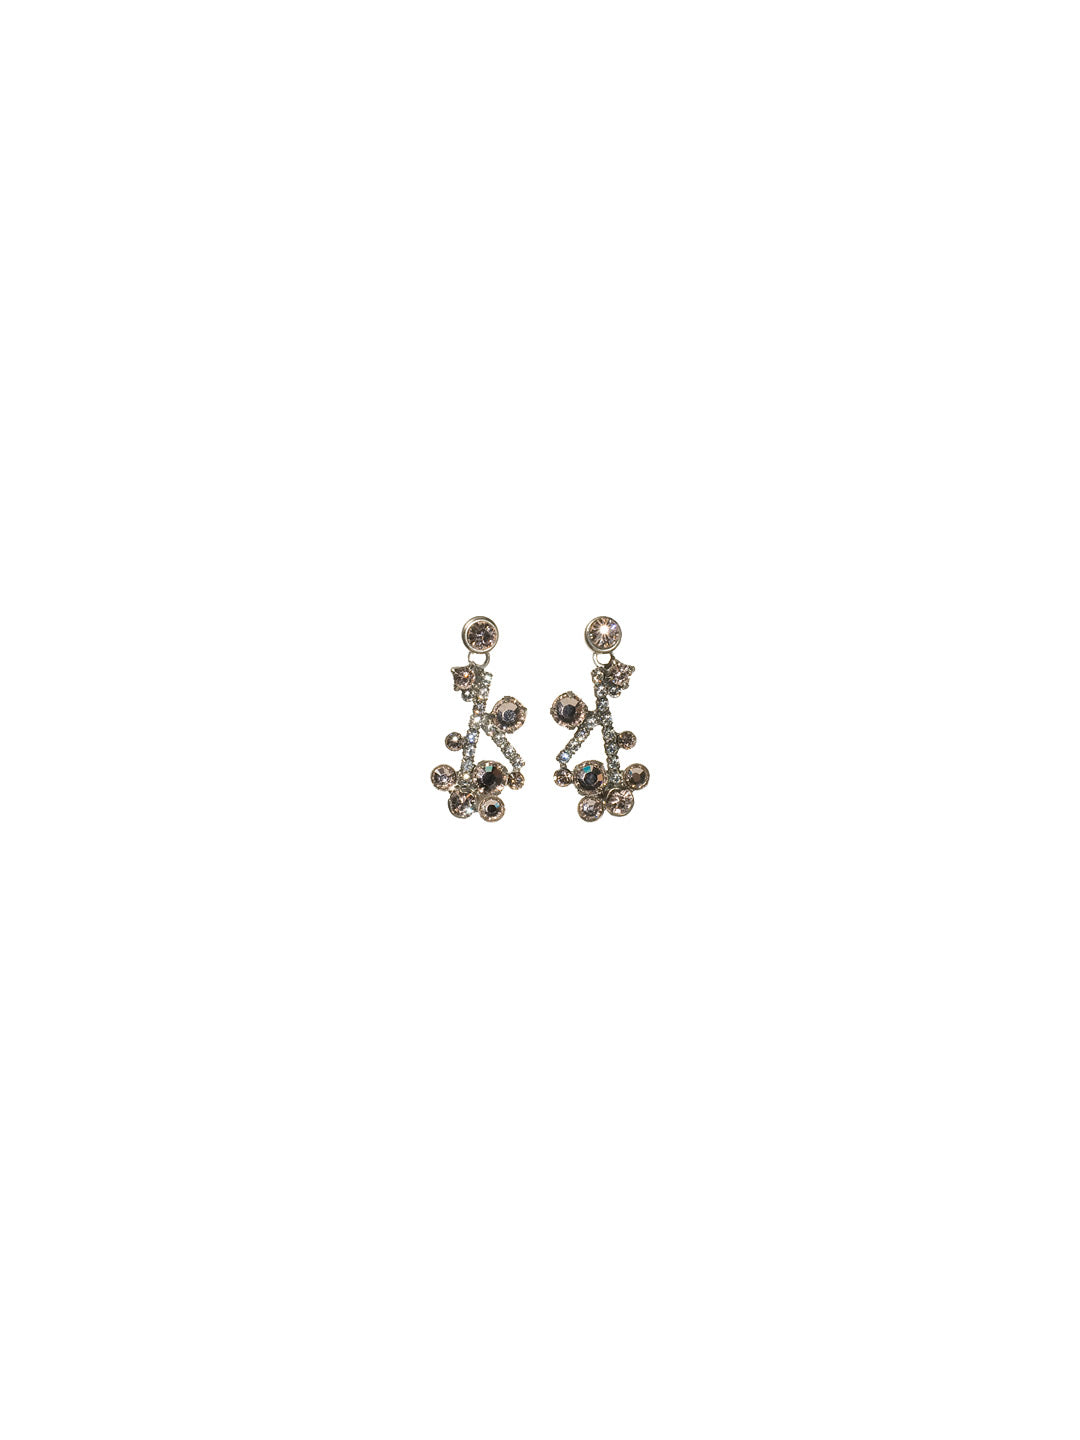 Abstract Asymmetrical Crystal Earring - ECF17ASSNB -  From Sorrelli's Snow Bunny collection in our Antique Silver-tone finish.